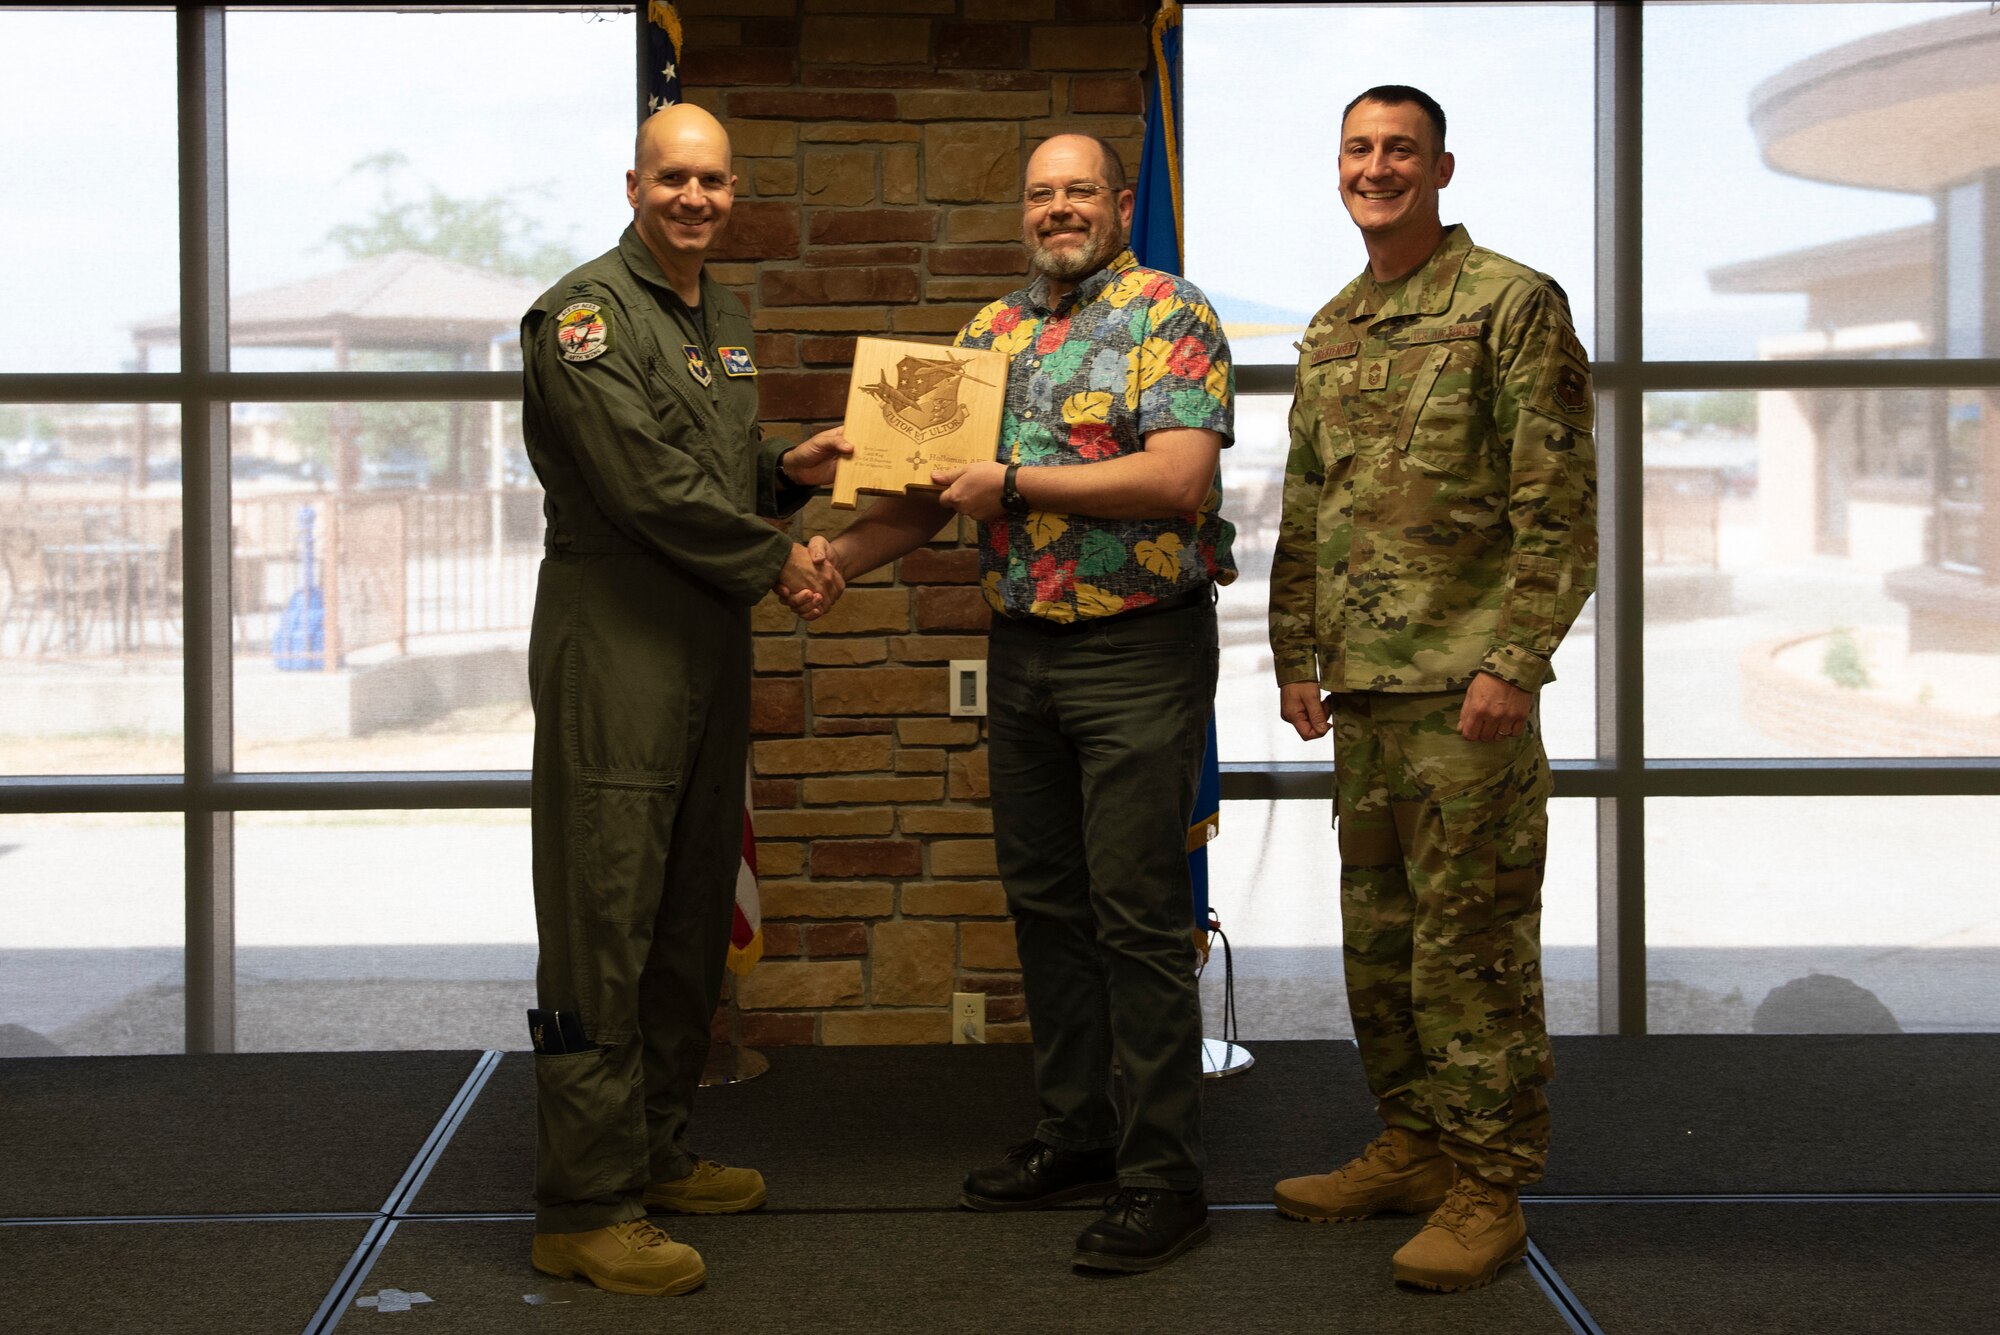 Mr. Kevin Leonard, from the 49th Logistics Readiness Squadron, accepts the Civilian Category III (Supervisory) of the Quarter Award during the 49th Wing’s 1st quarter awards ceremony, June 10, 2022, on Holloman Air Force Base, New Mexico.